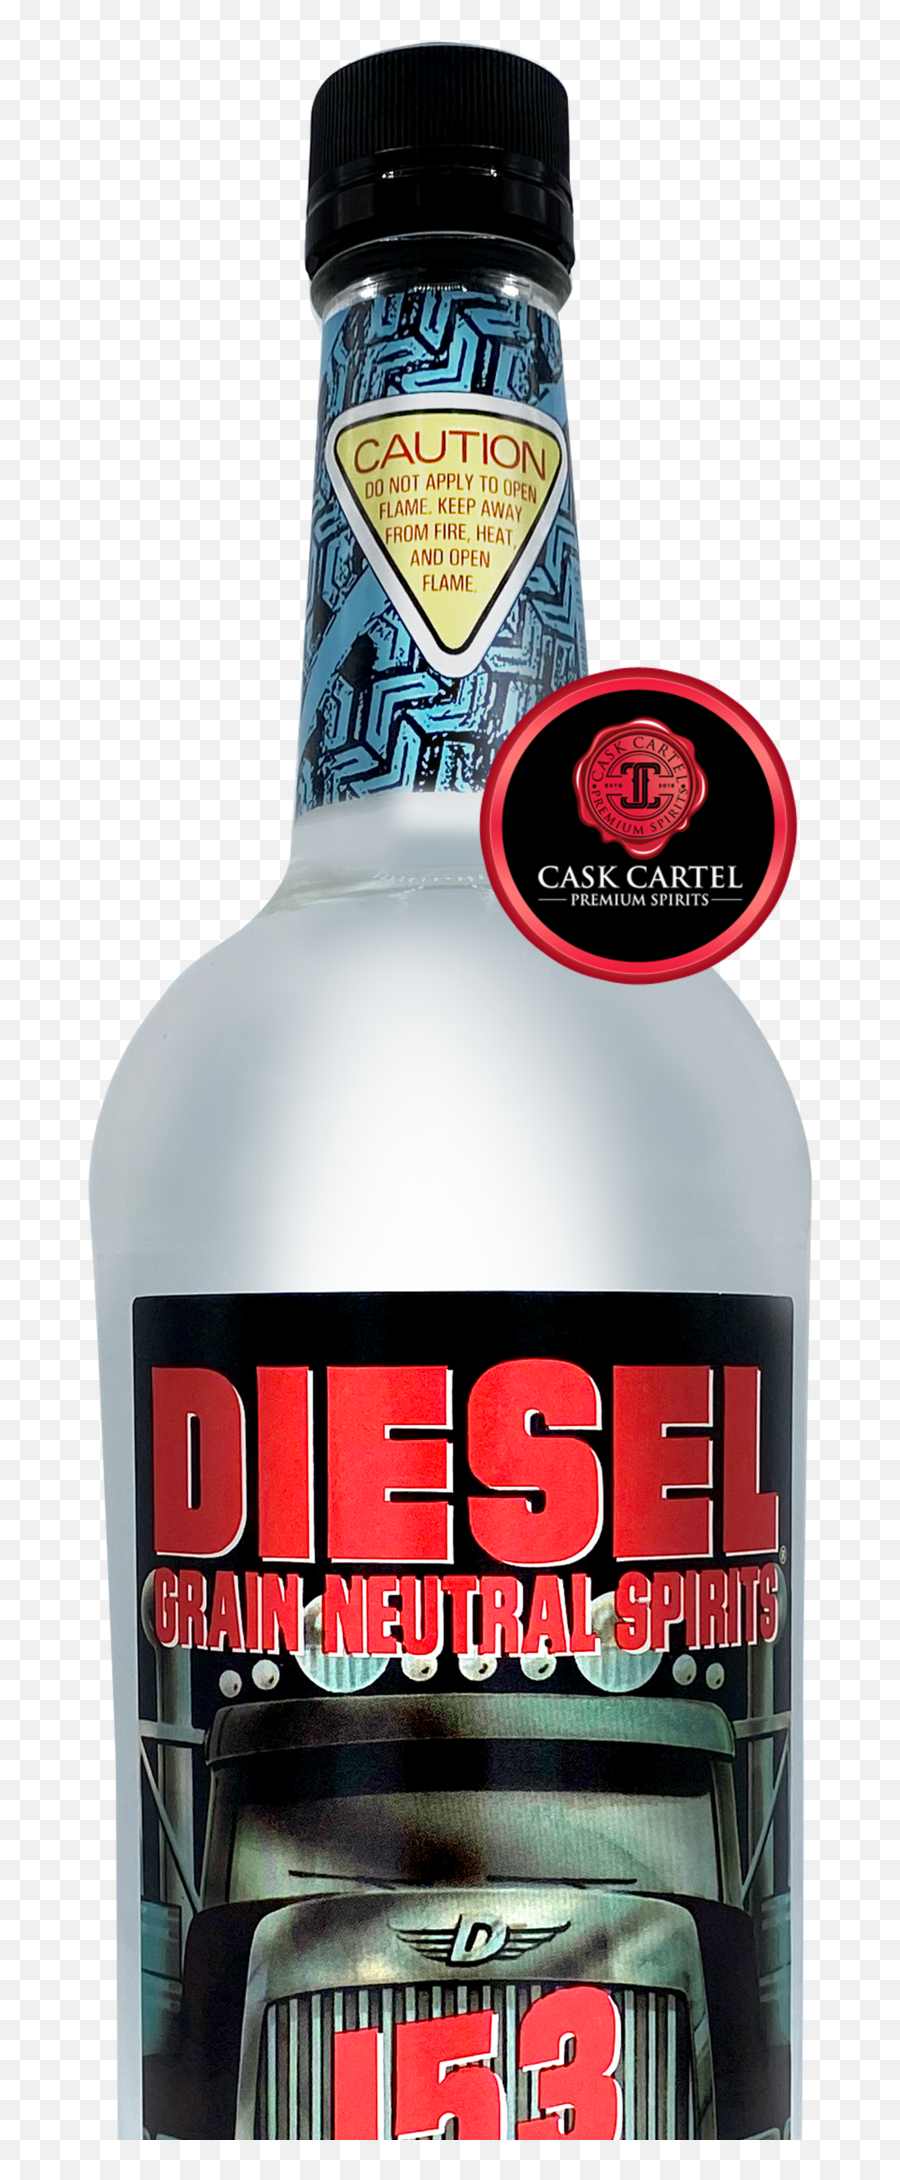 Diesel 153 Proof Grain Alcohol 1 Liter An Alternative To Everclear 151 - Diesel Liquor Png,Alcohol Bottles Png